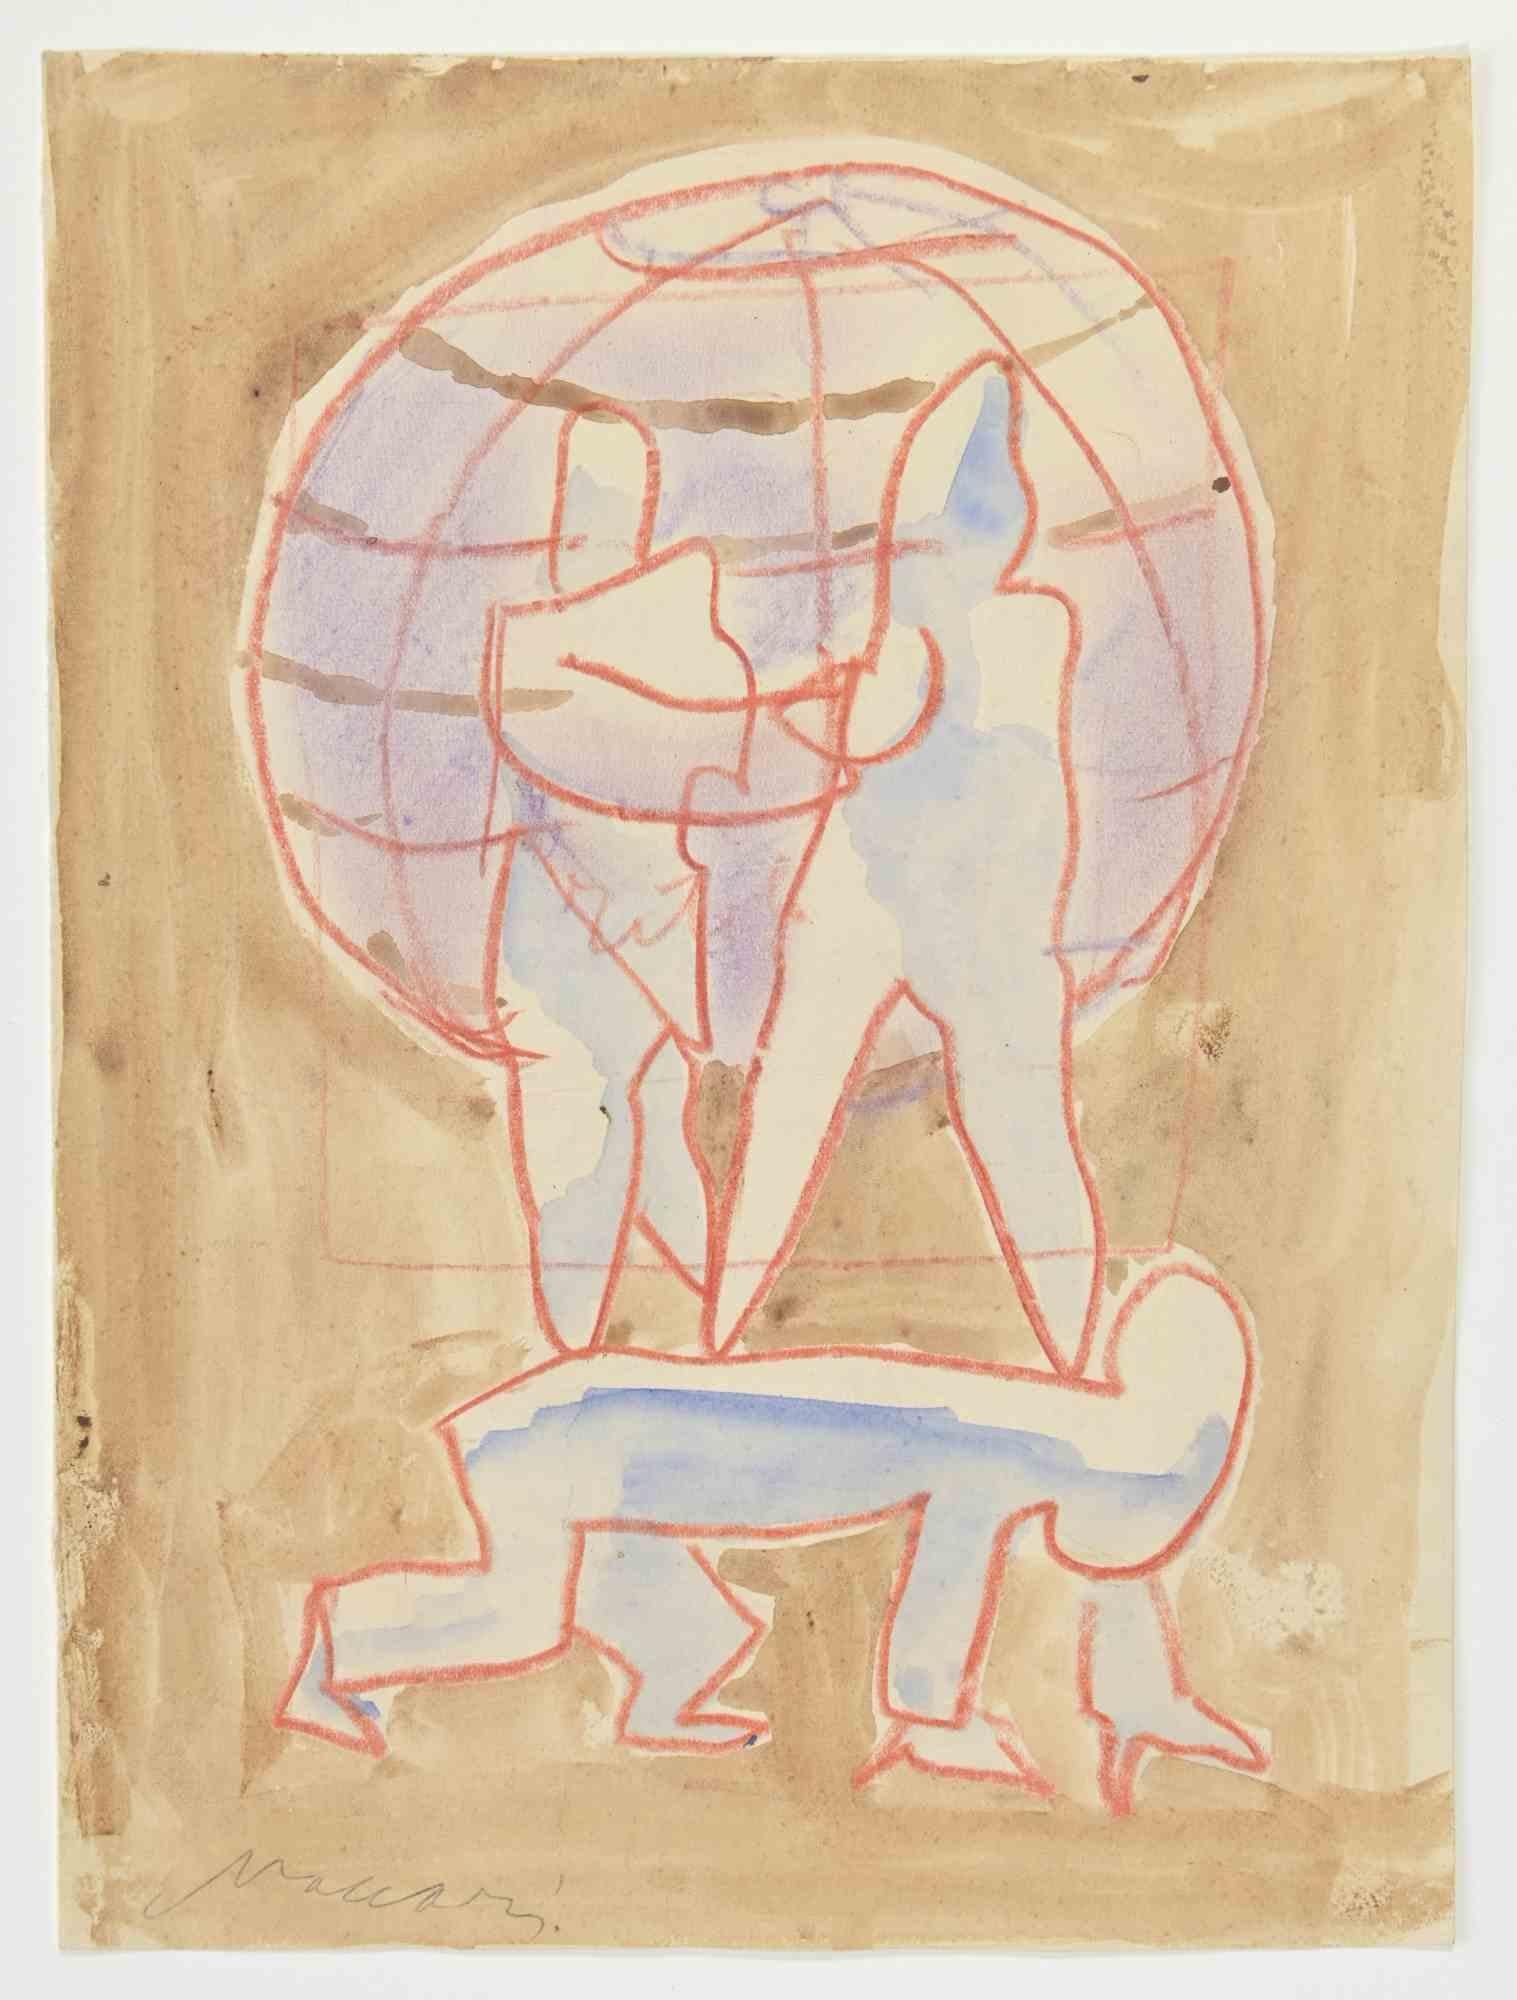 Mightiest on Earth is a Watercolor Drawing realized by Mino Maccari  (1924-1989) in the 1960s.

Hand-signed on the lower with another drawing on the rear.

Good condition.

Mino Maccari (Siena, 1924-Rome, June 16, 1989) was an Italian writer,